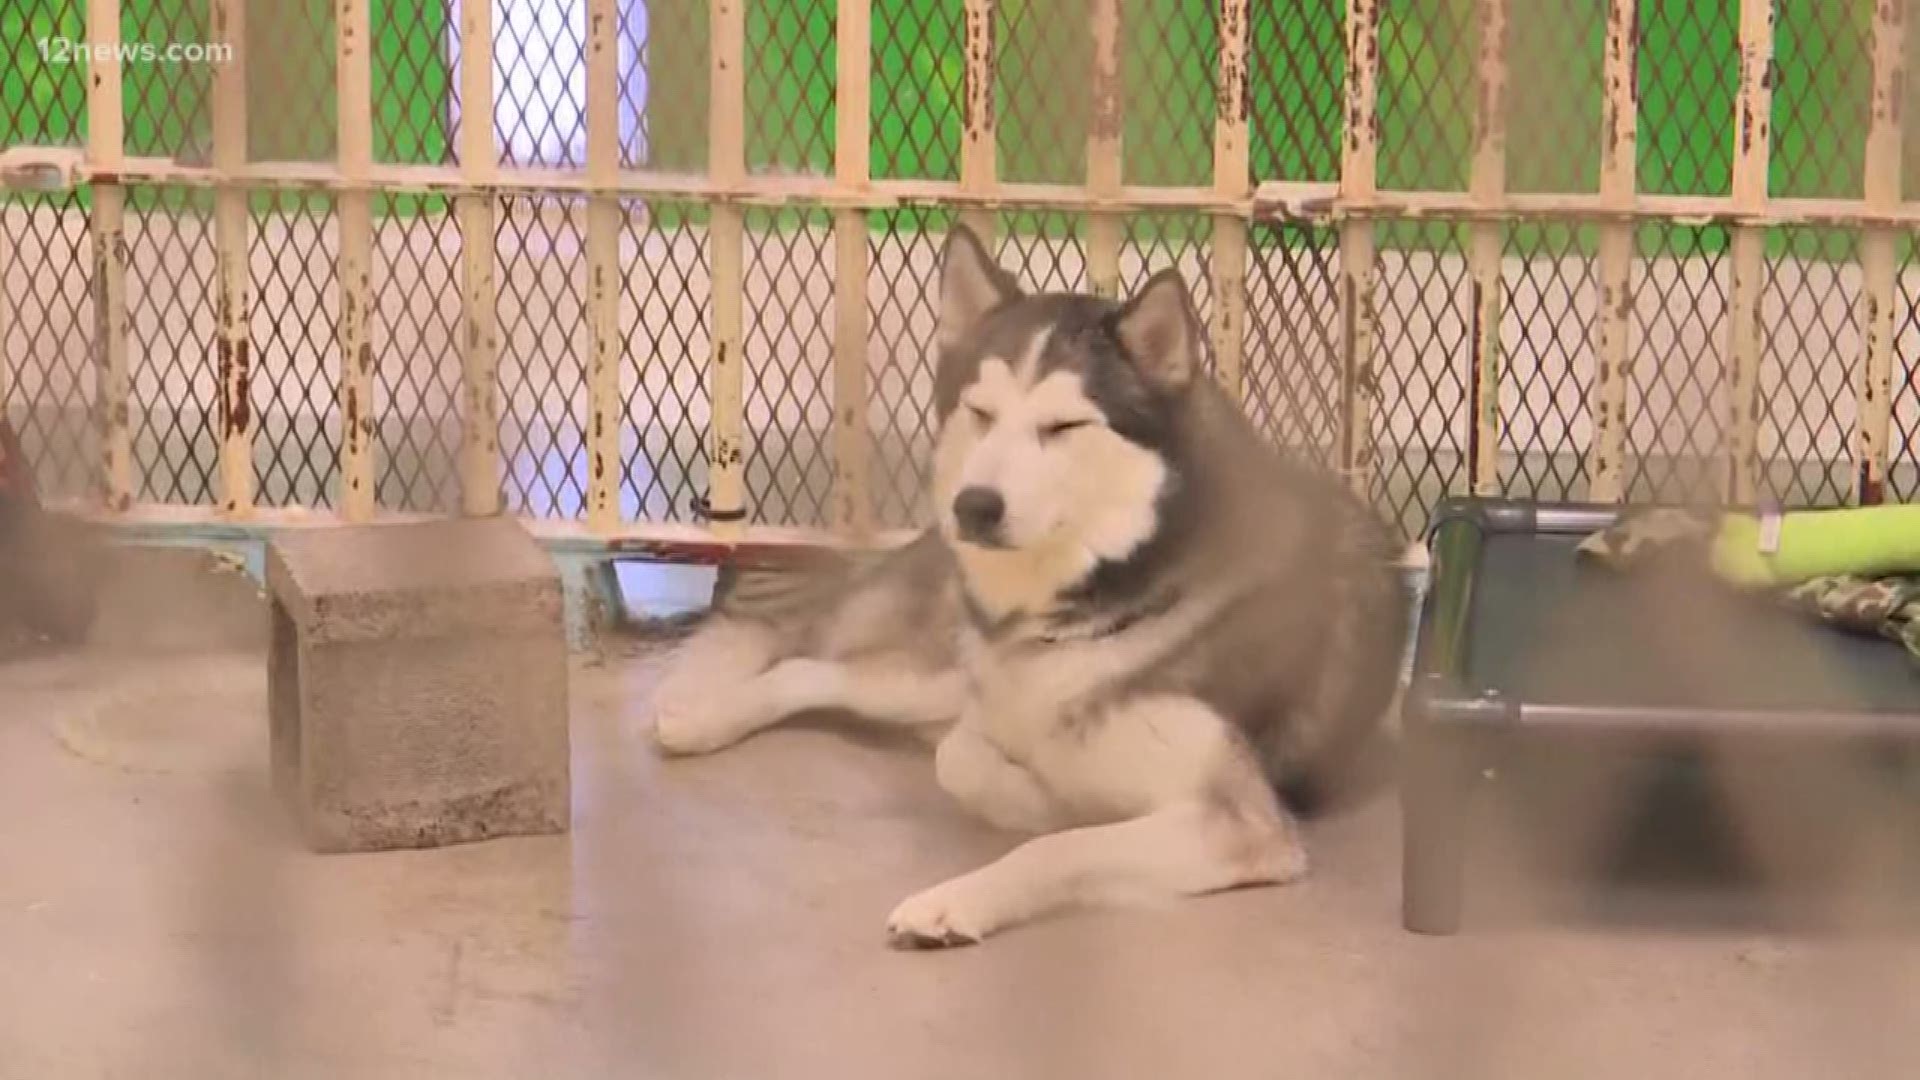 Over 50 dogs rescued from an East Valley shelter earlier this month are doing well and on the road to recovery. The dogs were rescued from Shelter Paws Animal Rescue.